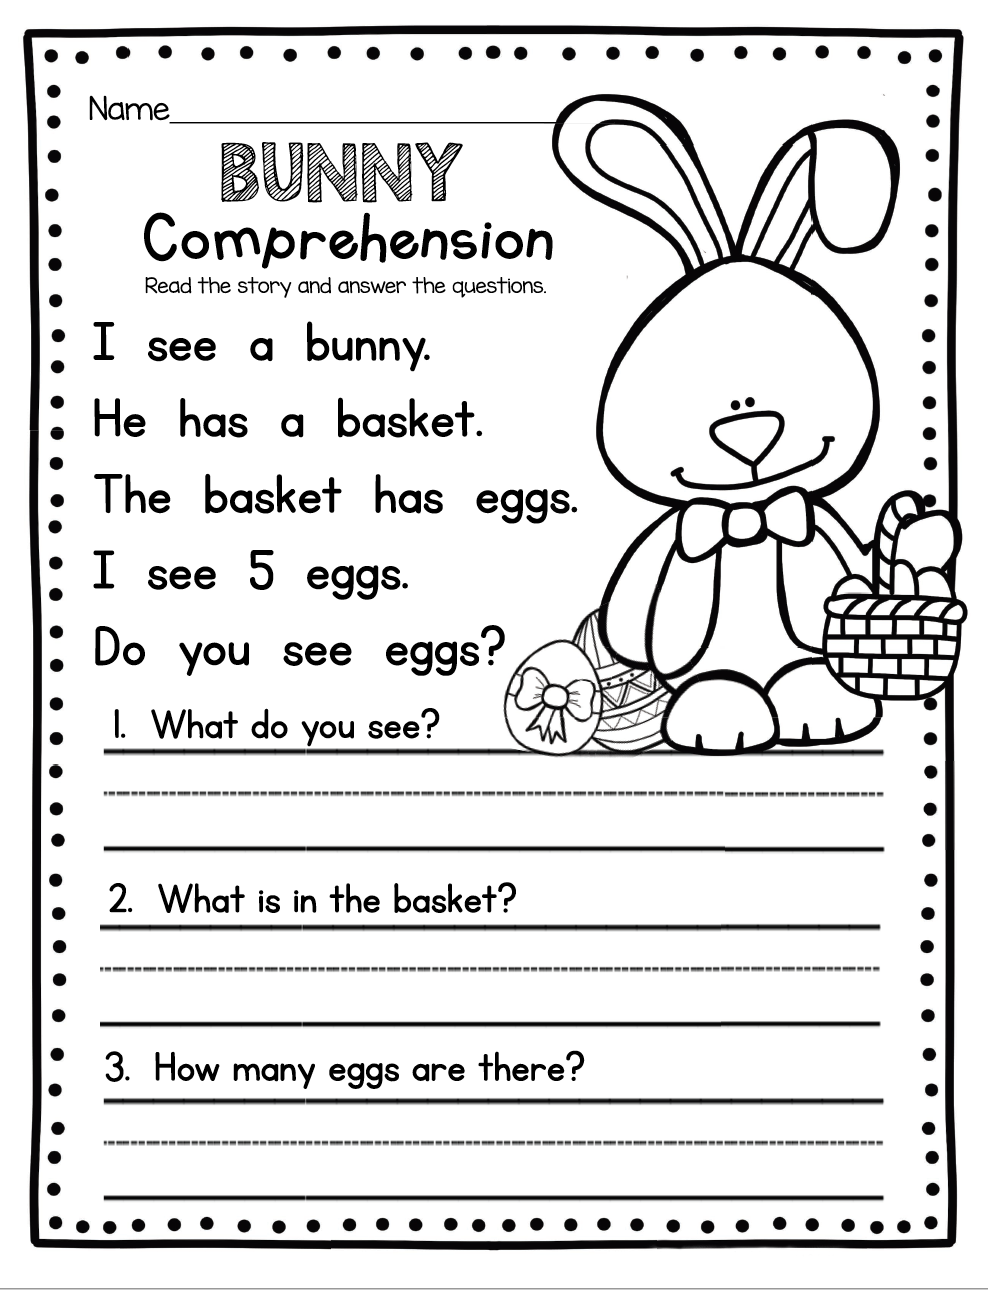 reading-worksheet-english-for-kids-step-by-step-reading-comprehension